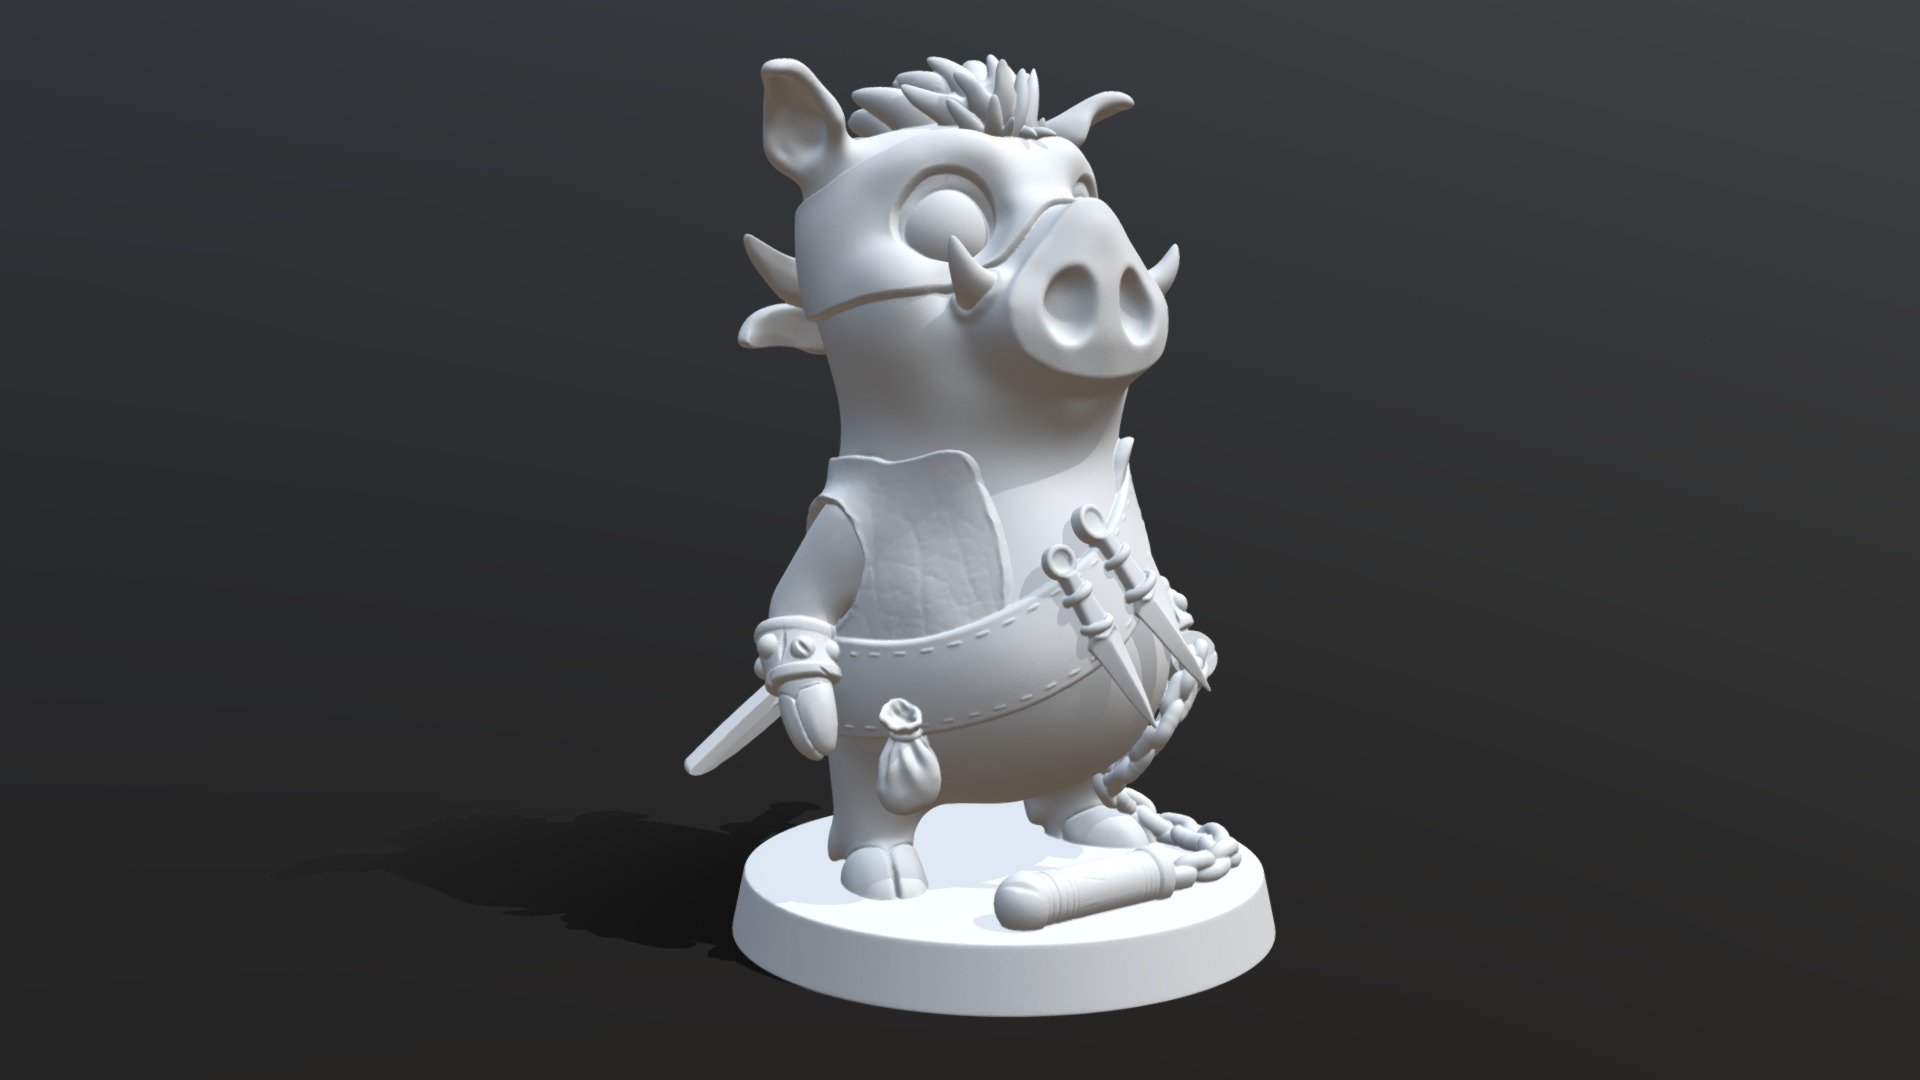 Almost forgot to publish this wild pig. Some freelance work I do during the holidays. One of a collection of small statues for board game &ldquo;Watchmen of Destiny